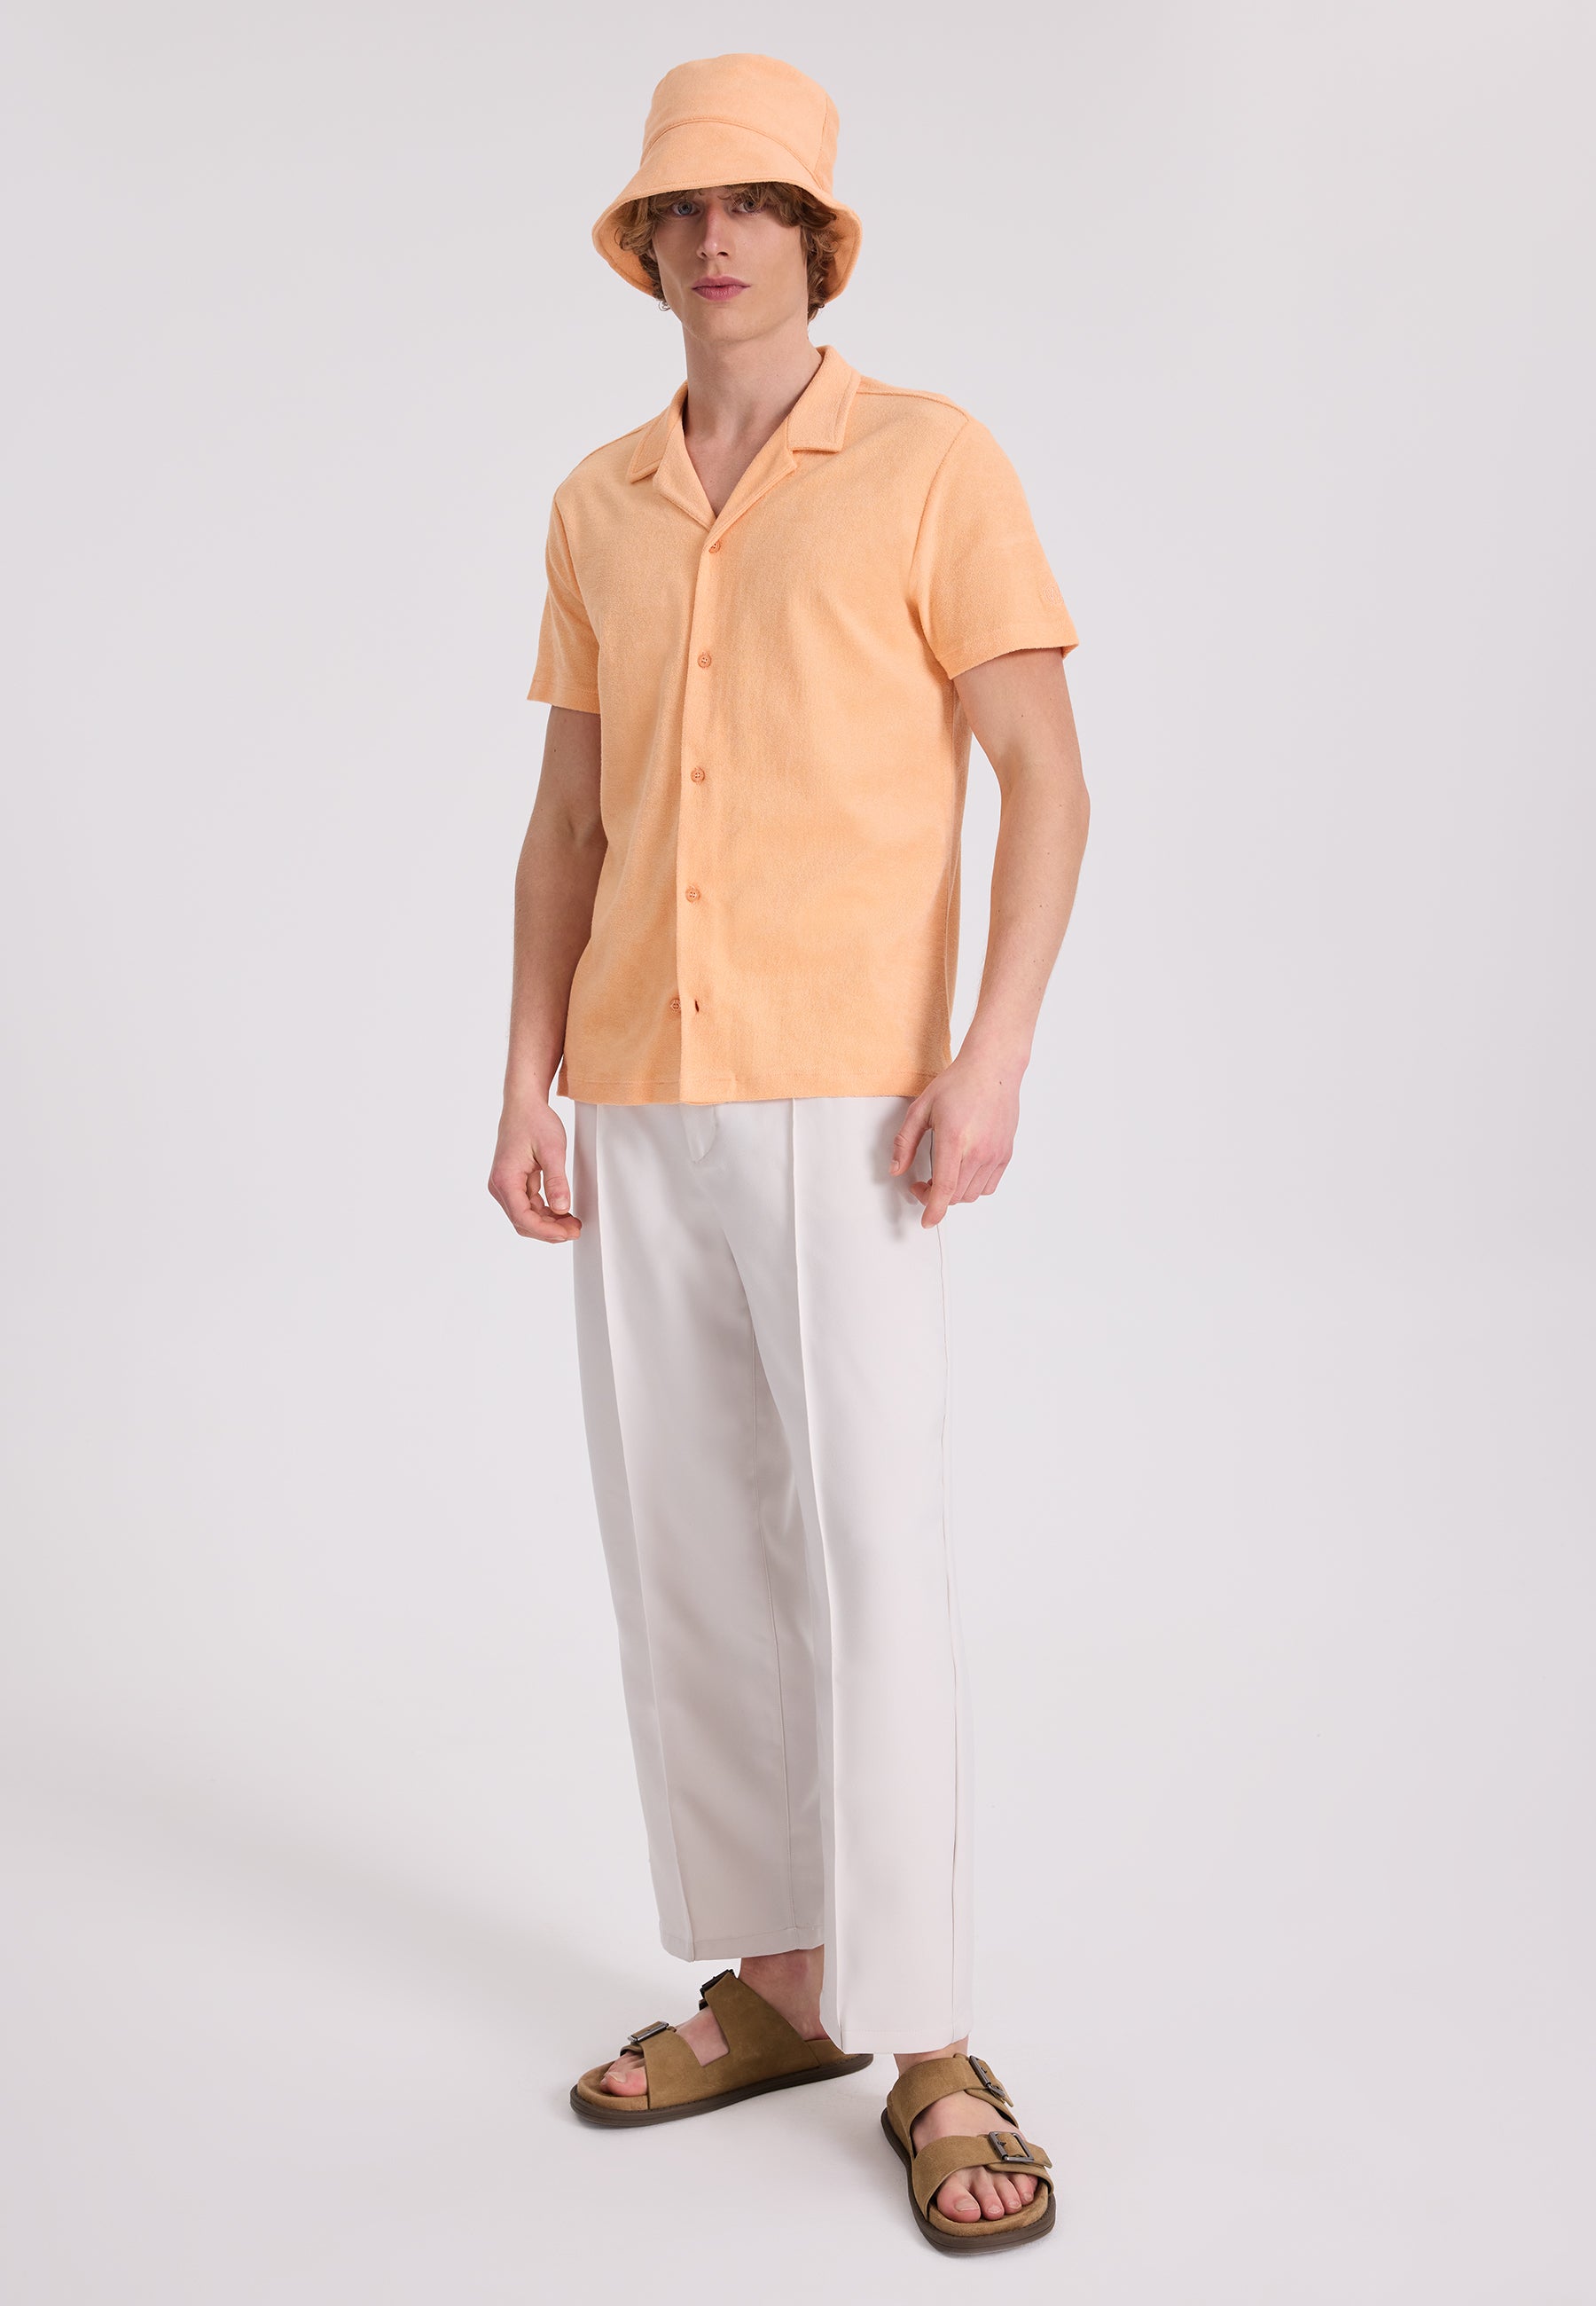 BREEZE TERRY TOWELLING S/S SHIRT in Apricot Wash